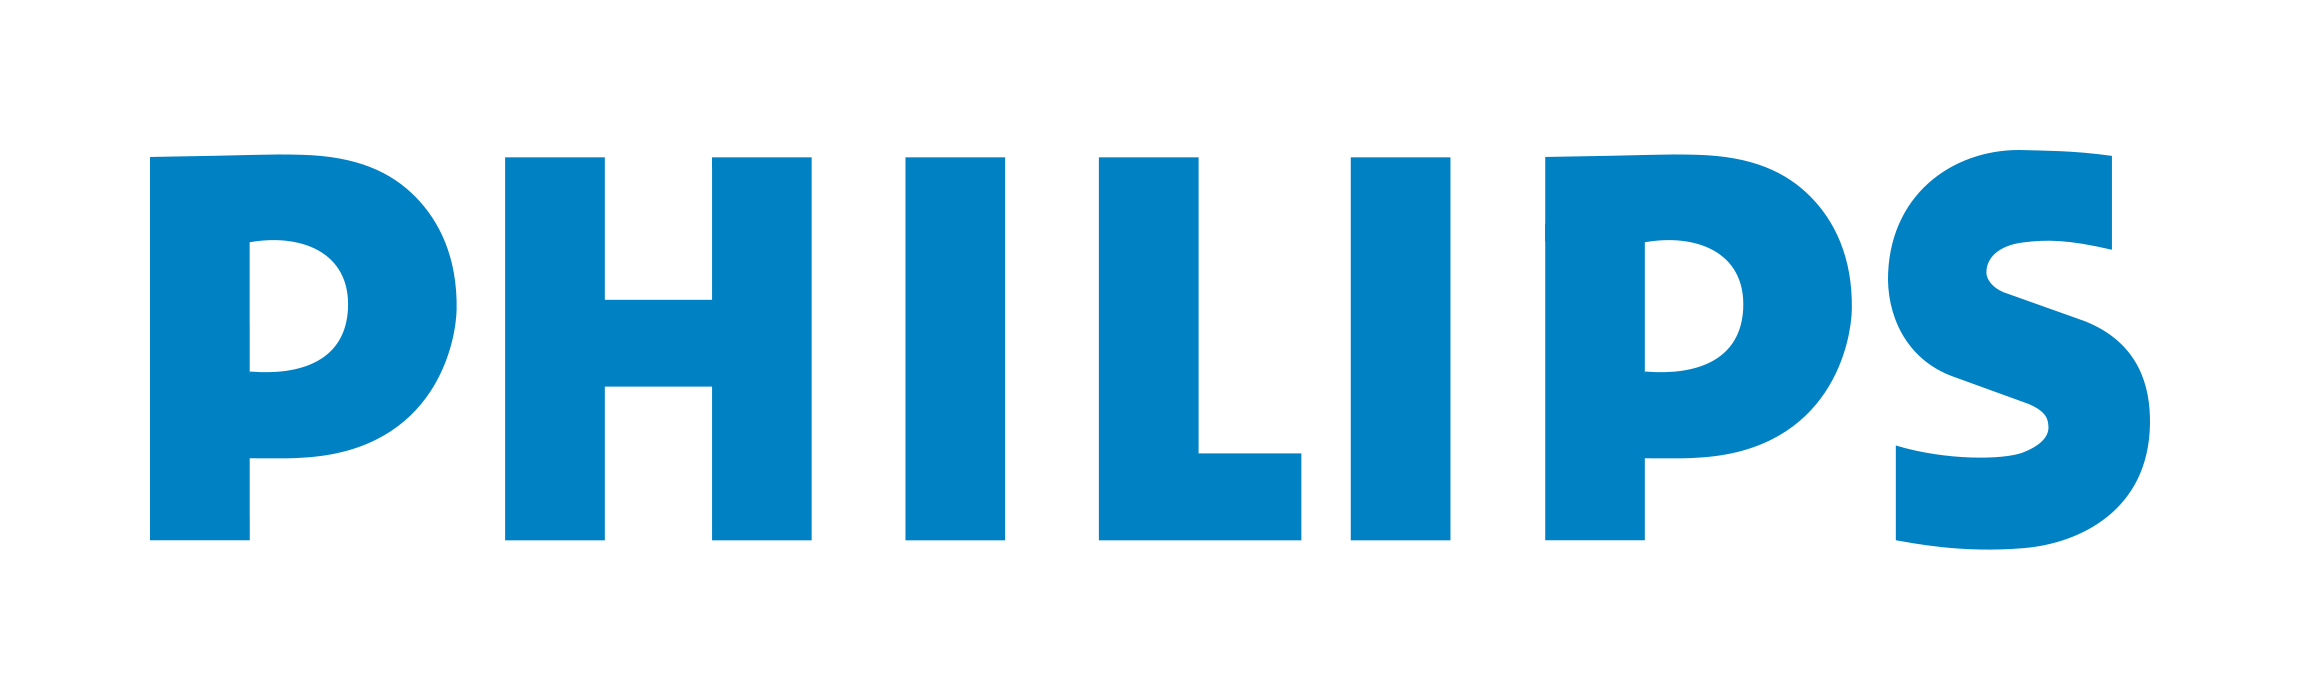 Philips Logo PNG - 180748